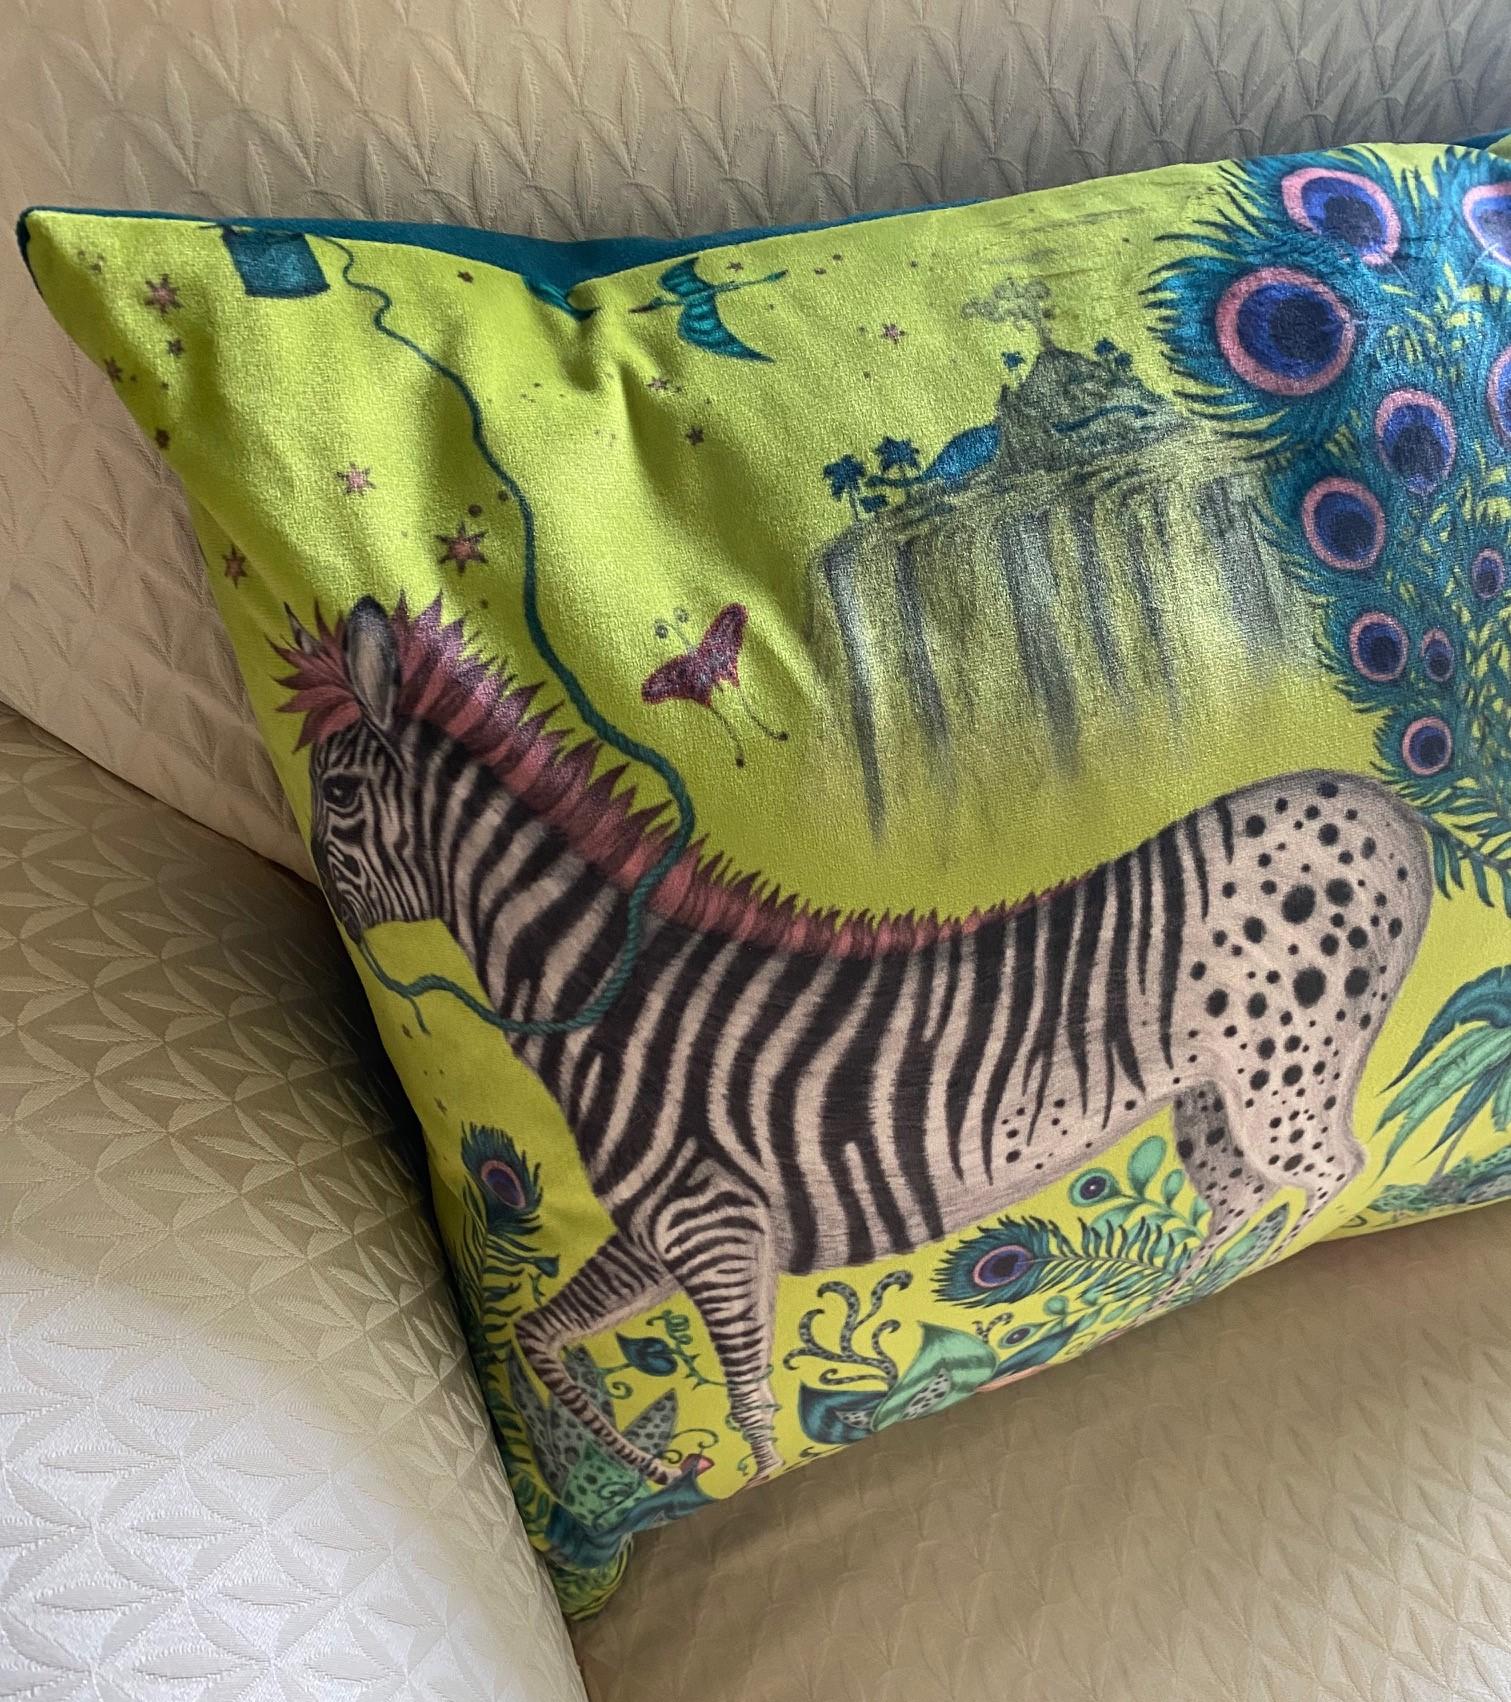 A P.G. Ruskin and Company original. Knife-edge rectangular pillow (zippered case and down insert) in lime green Lost World Velvet Fabric - Emma J Shipley (front) and contrasting teal cotton velvet (back). There are 6 pillows available: 4 with Zebras